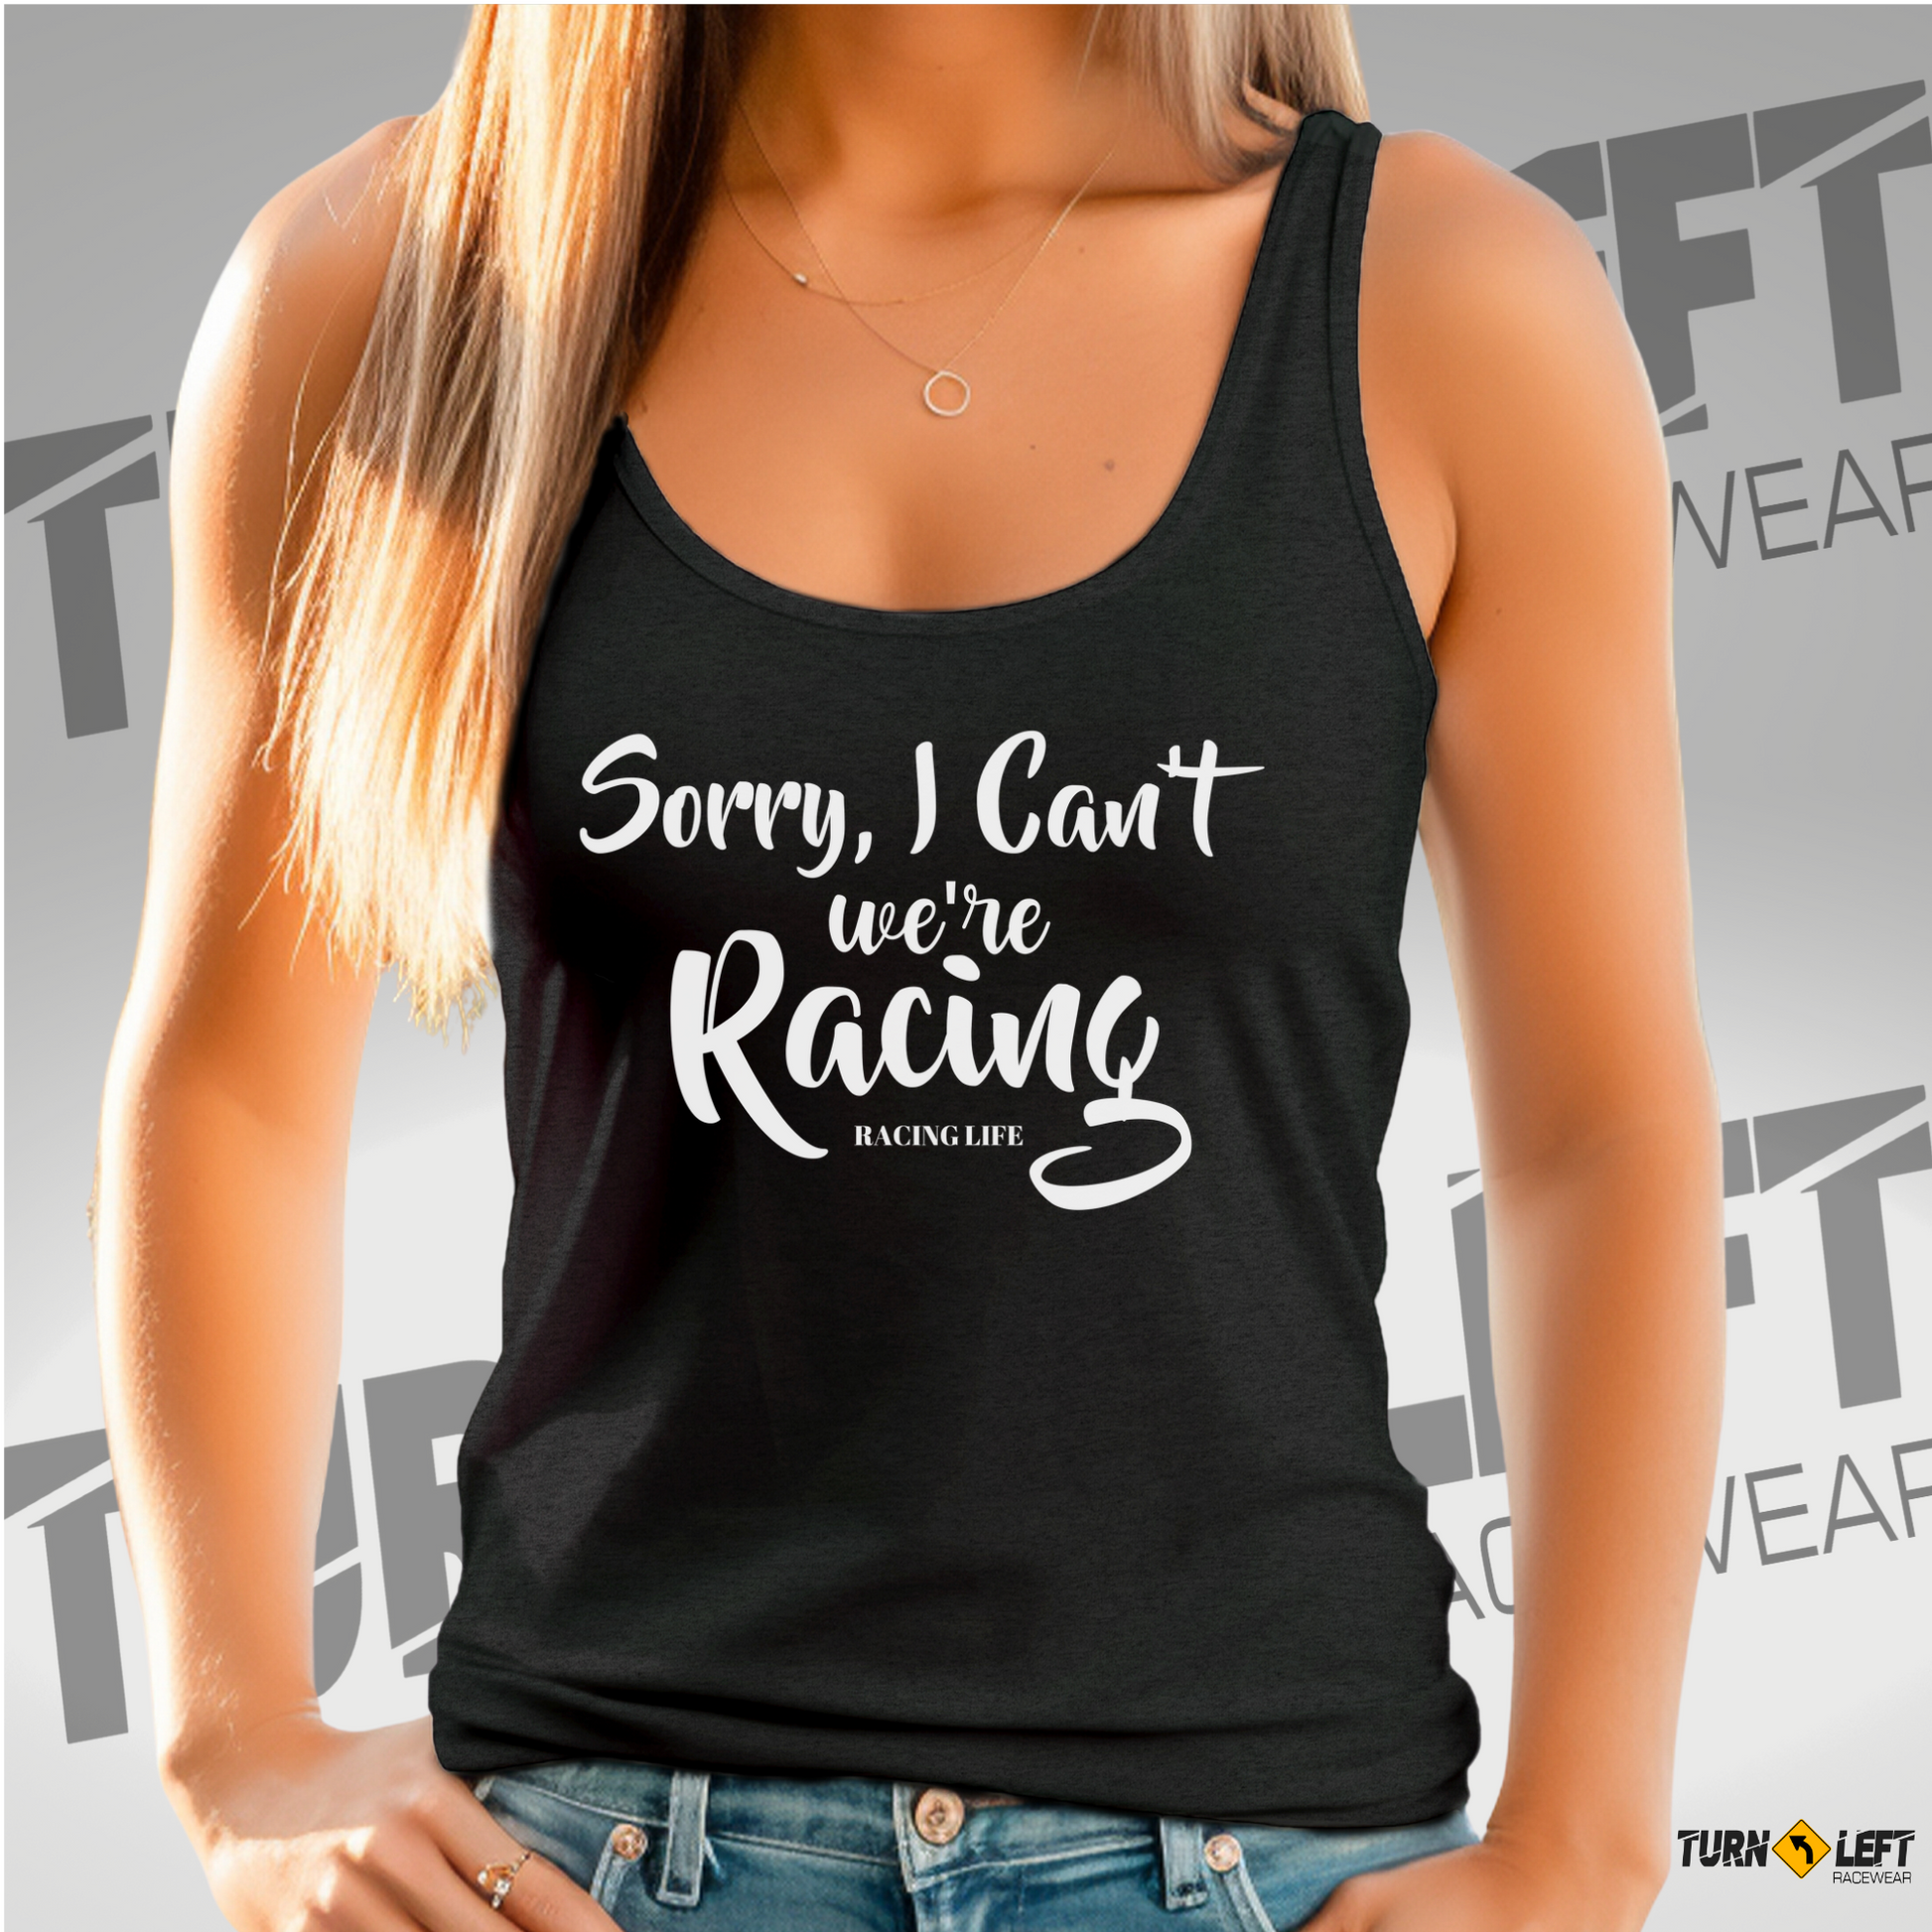 Sorry I Can't It's Raceday Tank Top, Women's racetrack shirt, Women's, Racing quote shirts, Racing saying shirts, Race wife, racer girlfriend and race mom gifts. 